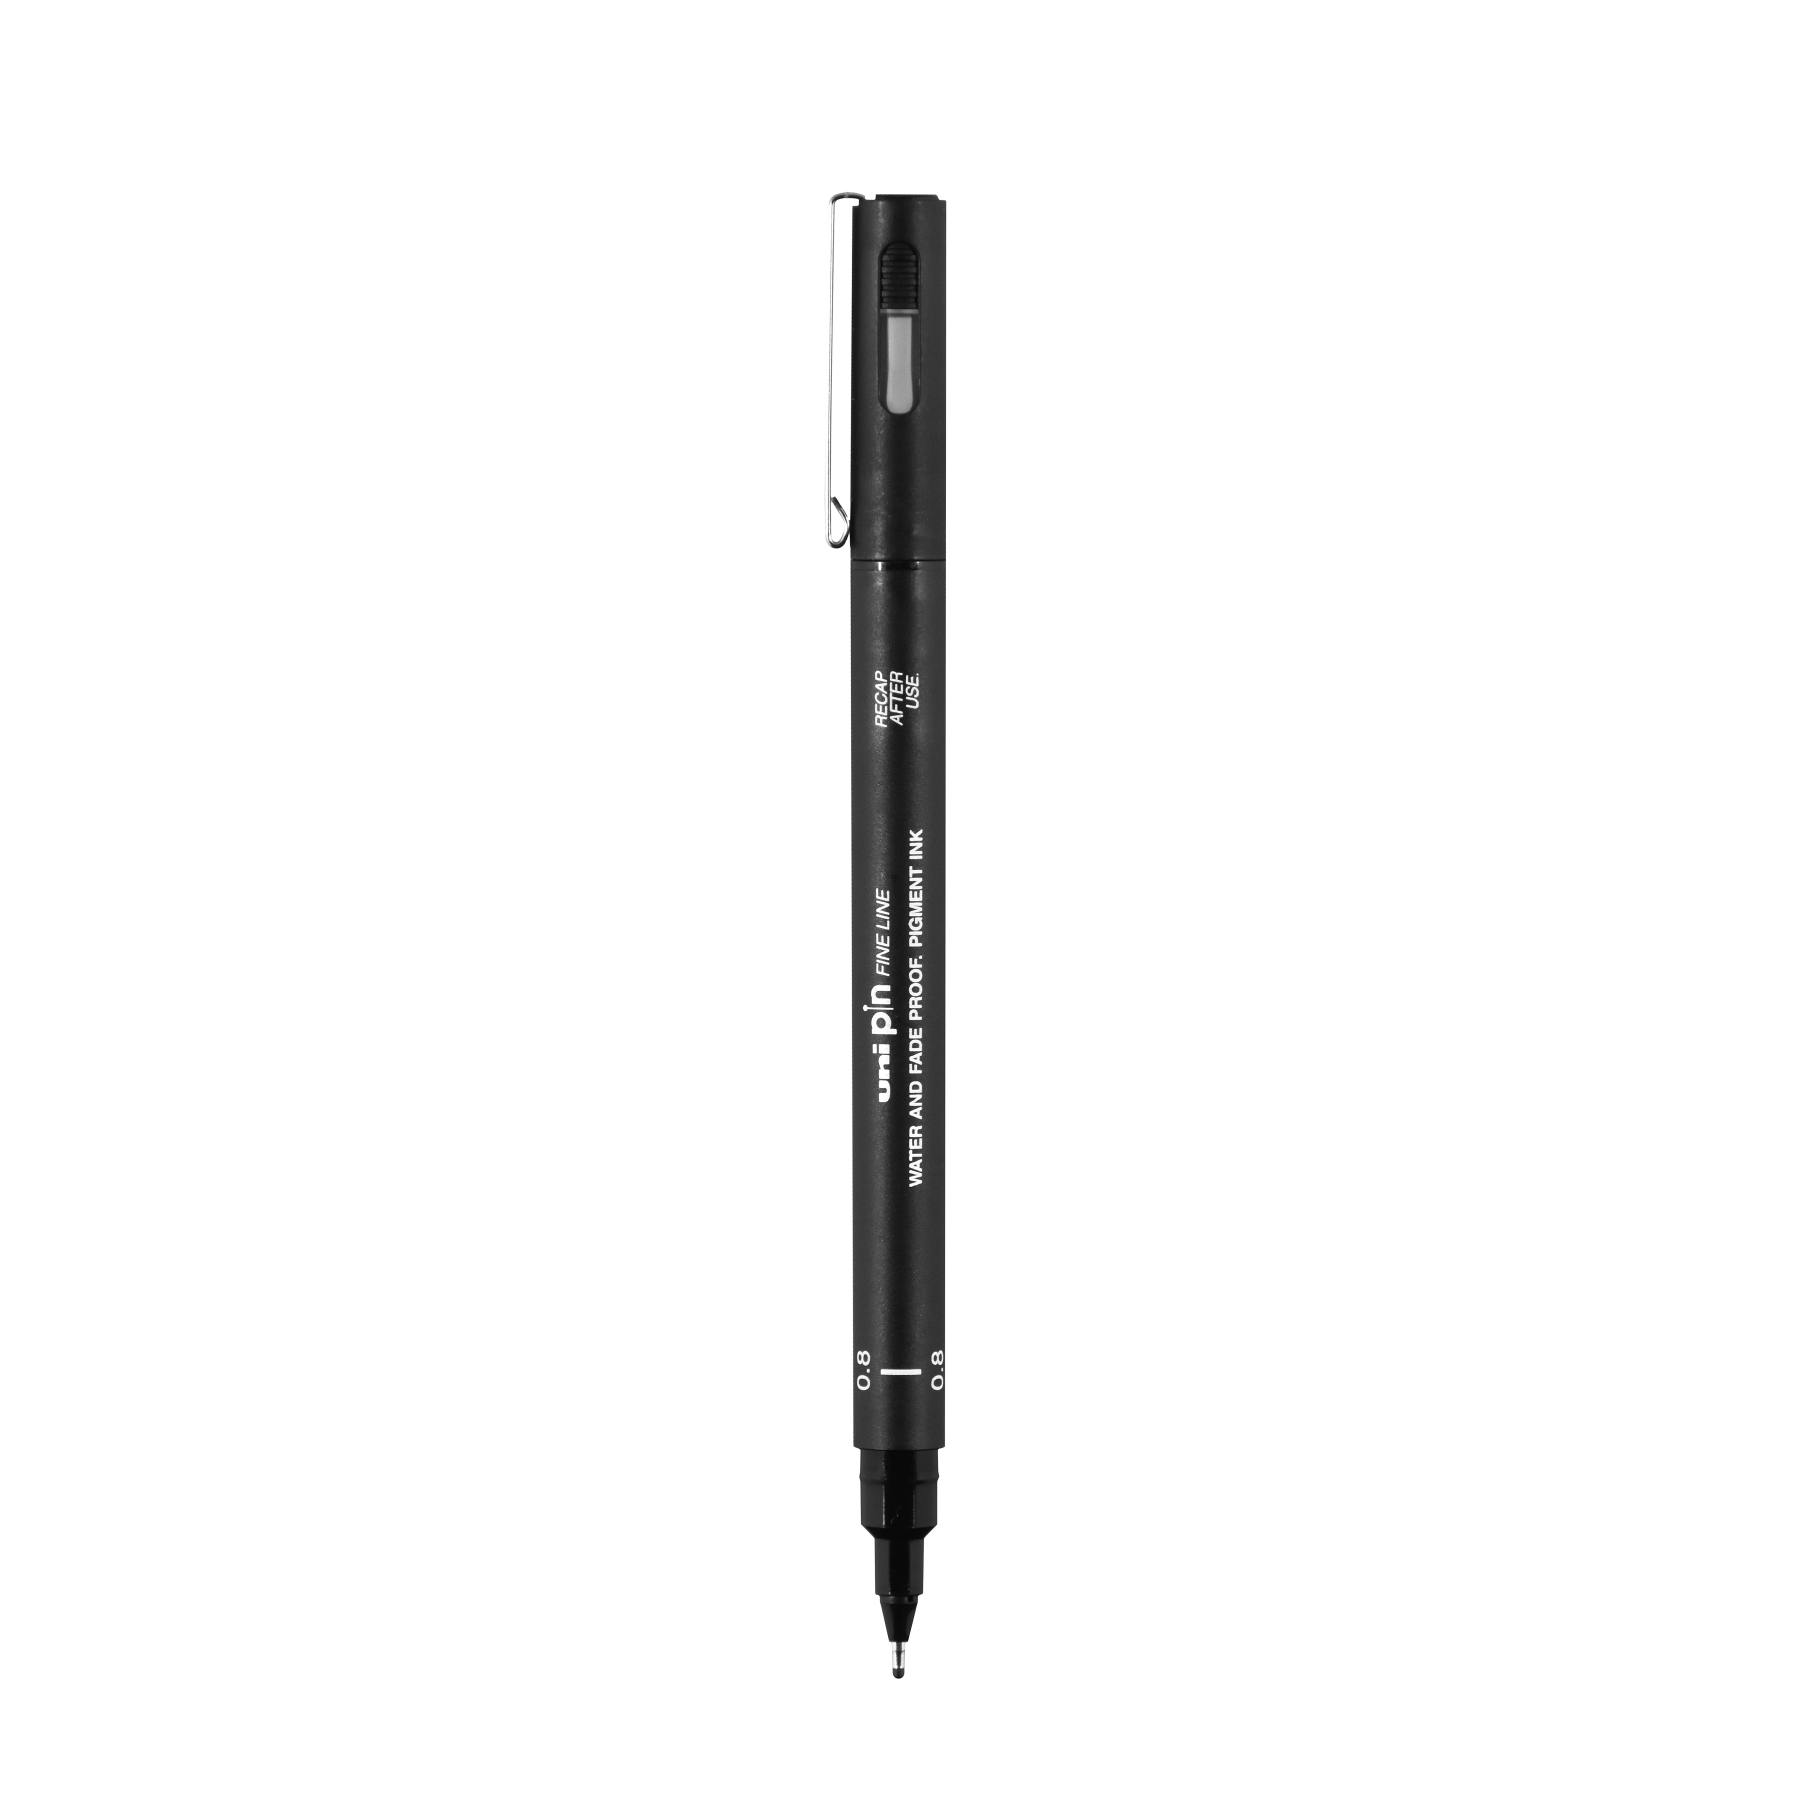 Black Marker Fineliner, Stationery Supplies, Thin Drawing Marker